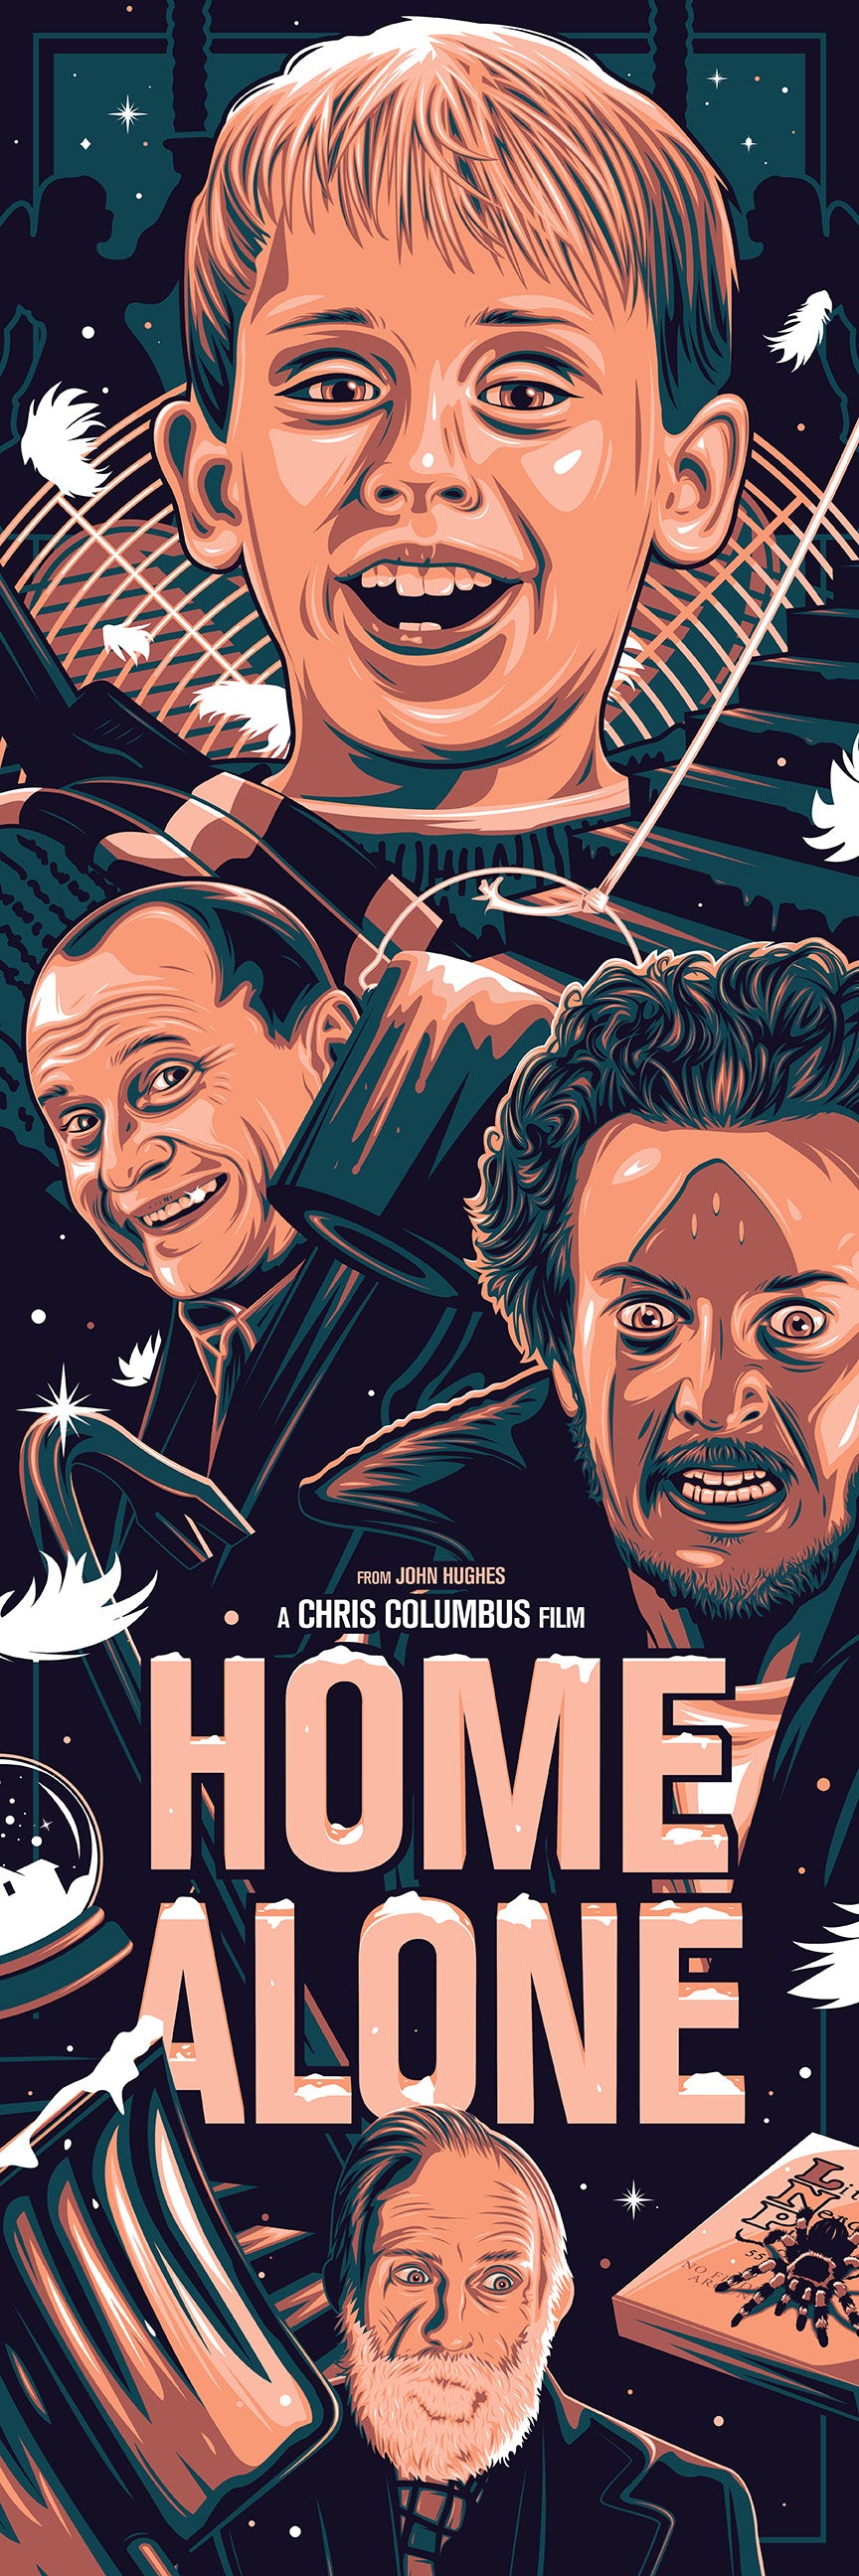 "Home Alone Variant" by Dave Stafford